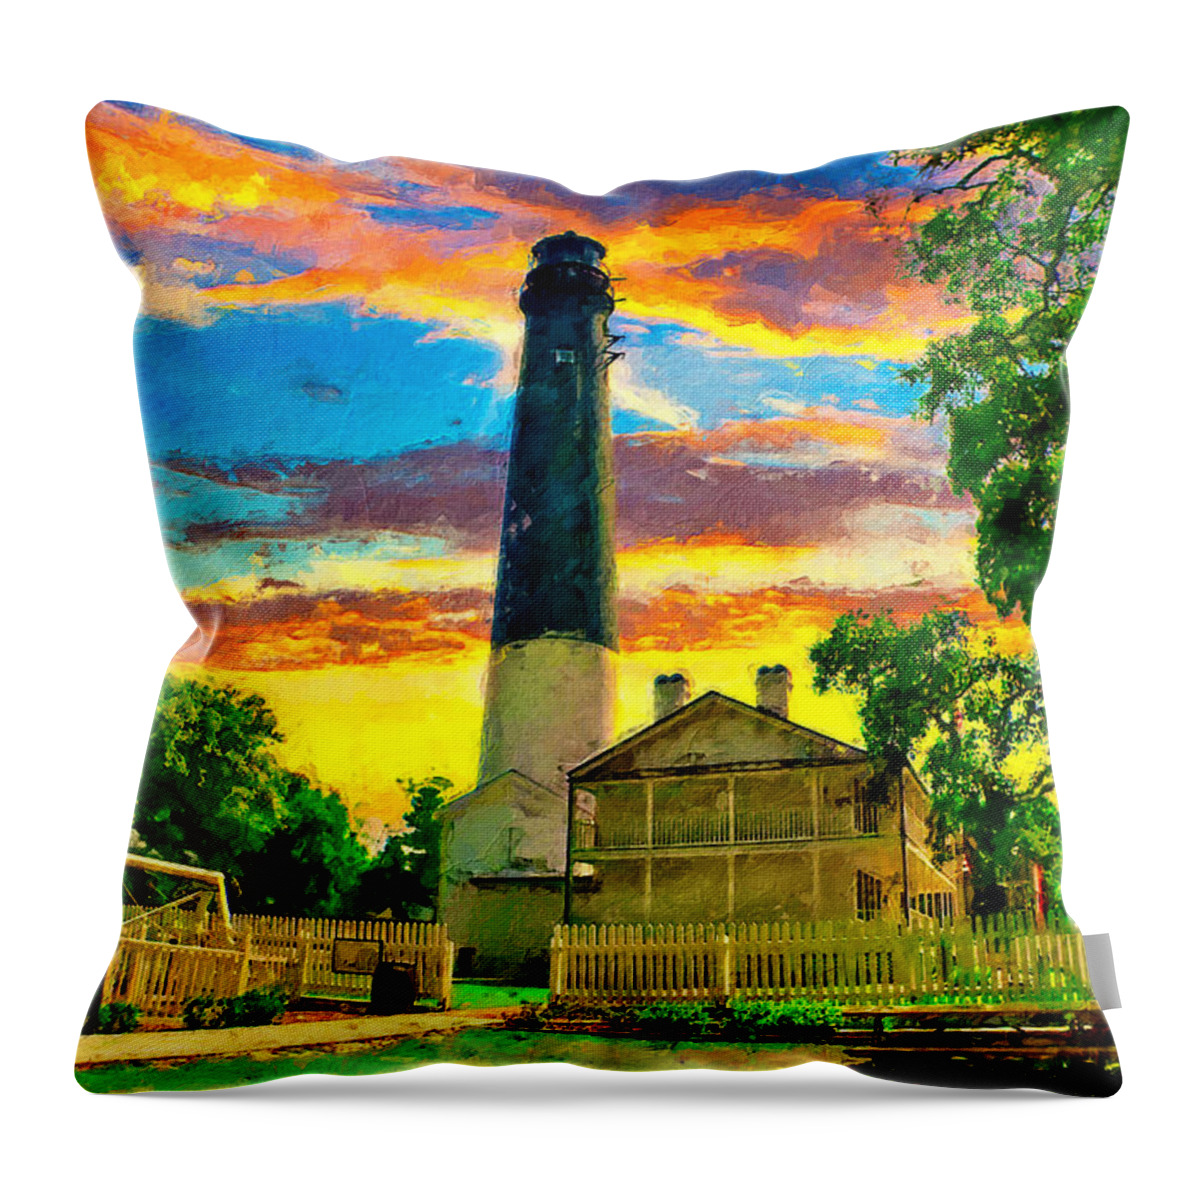 Pensacola Lighthouse Throw Pillow featuring the digital art The Pensacola lighthouse and maratime museum at sunset - digital painting by Nicko Prints